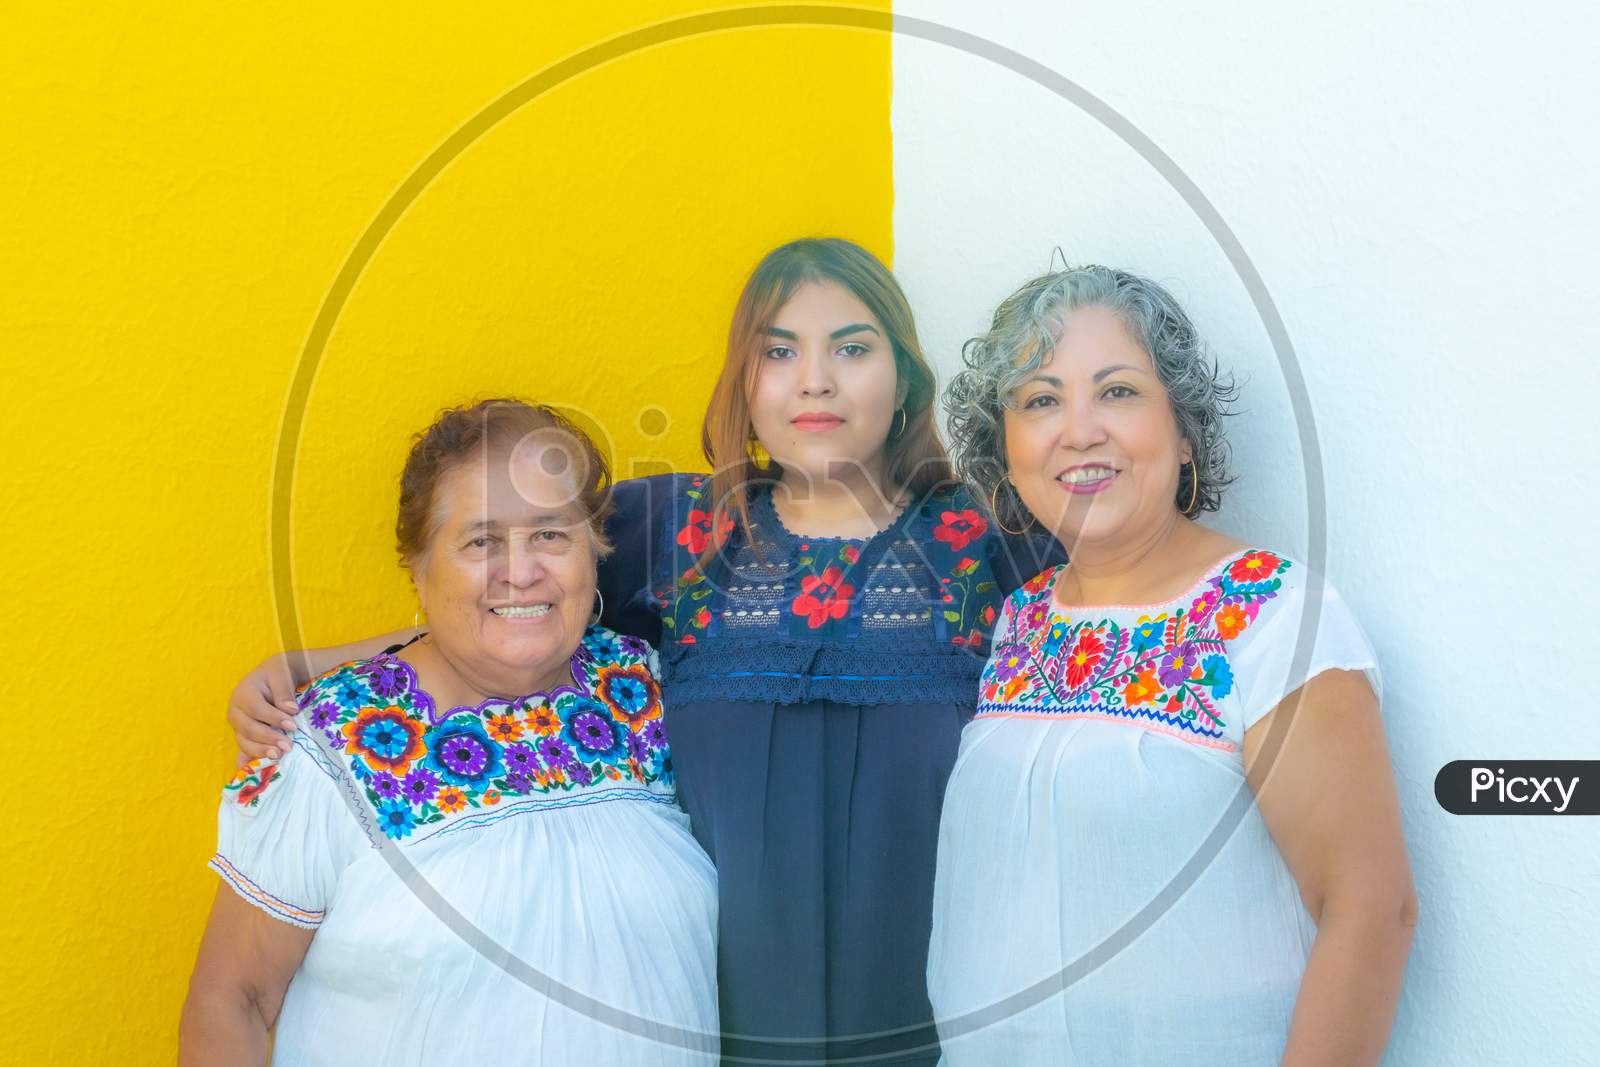 Granddaughter Between Grandmother And Mother Looking At The Camera, Three Generations Of Mexican Women Smiling With Floral Print Blouses On A White And Yellow Background